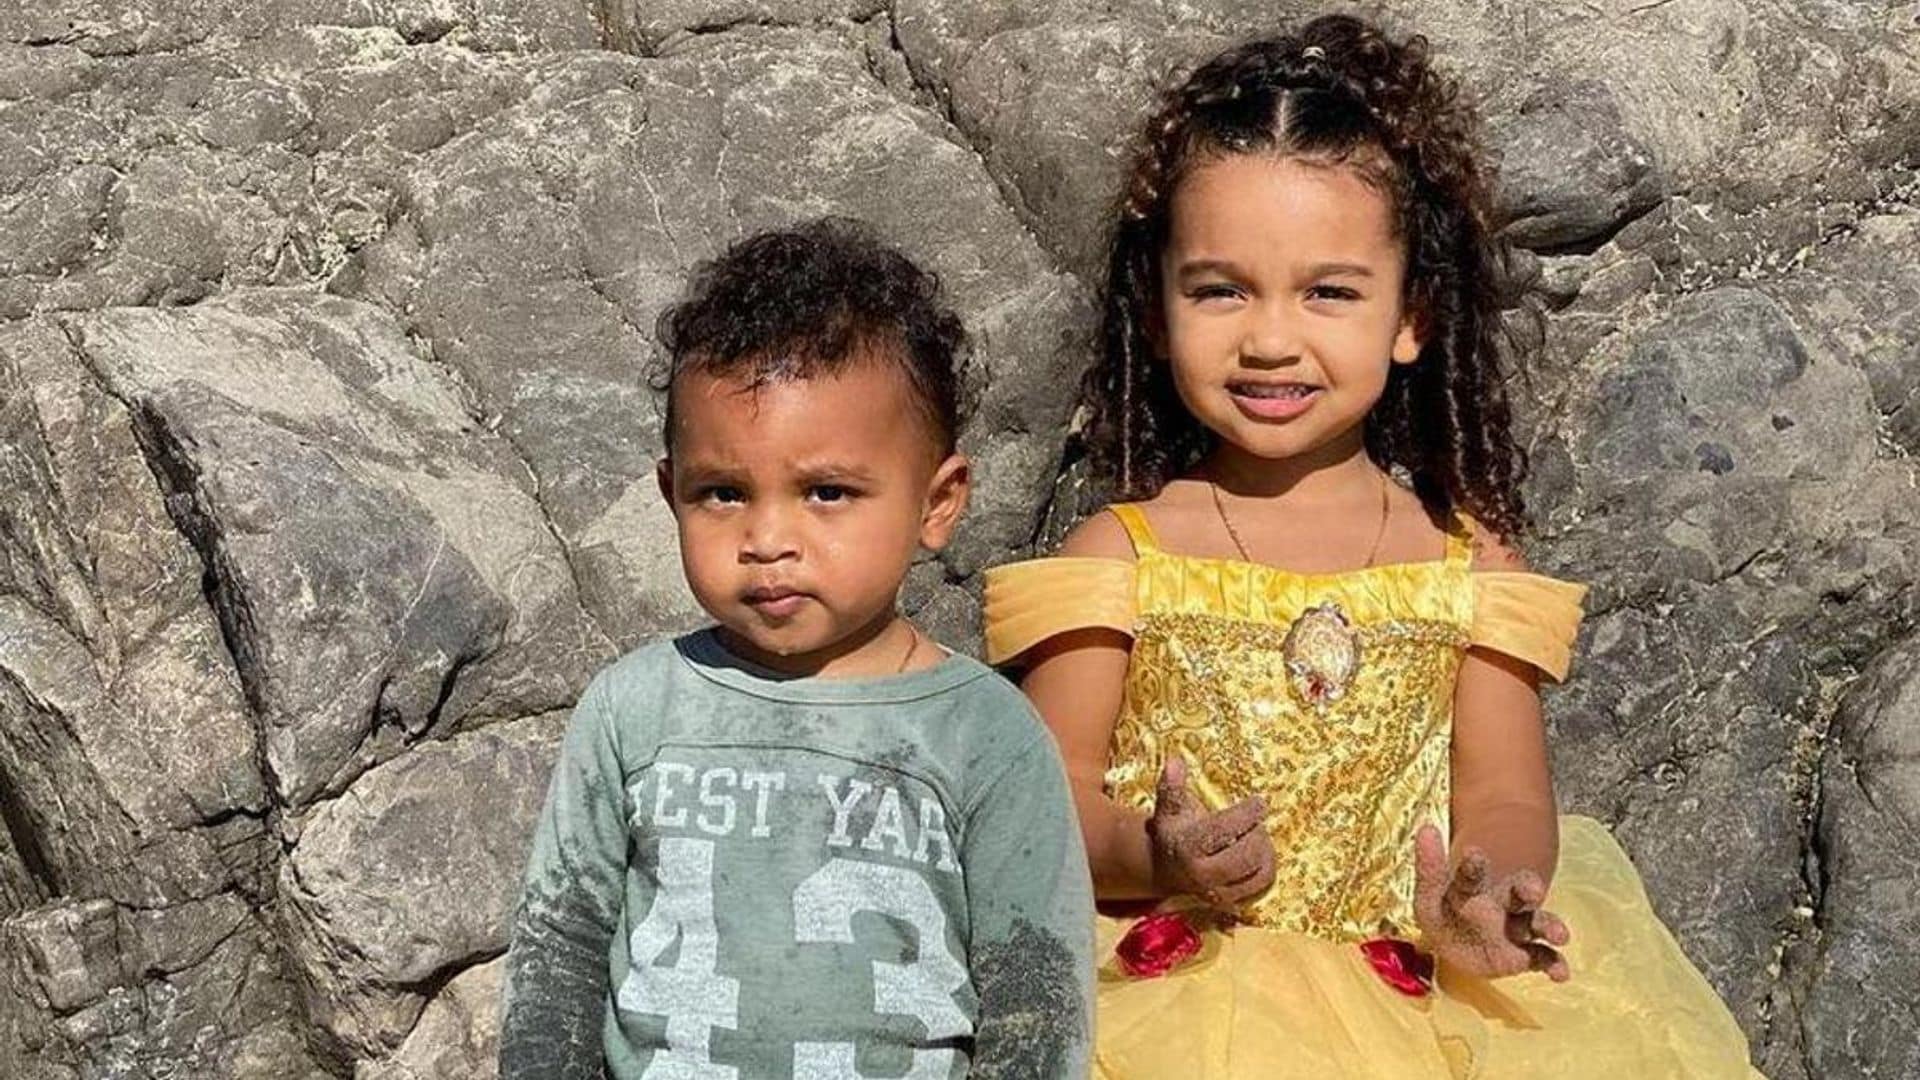 Watch Kim Kardashian’s youngest kids rapping to their dad’s song